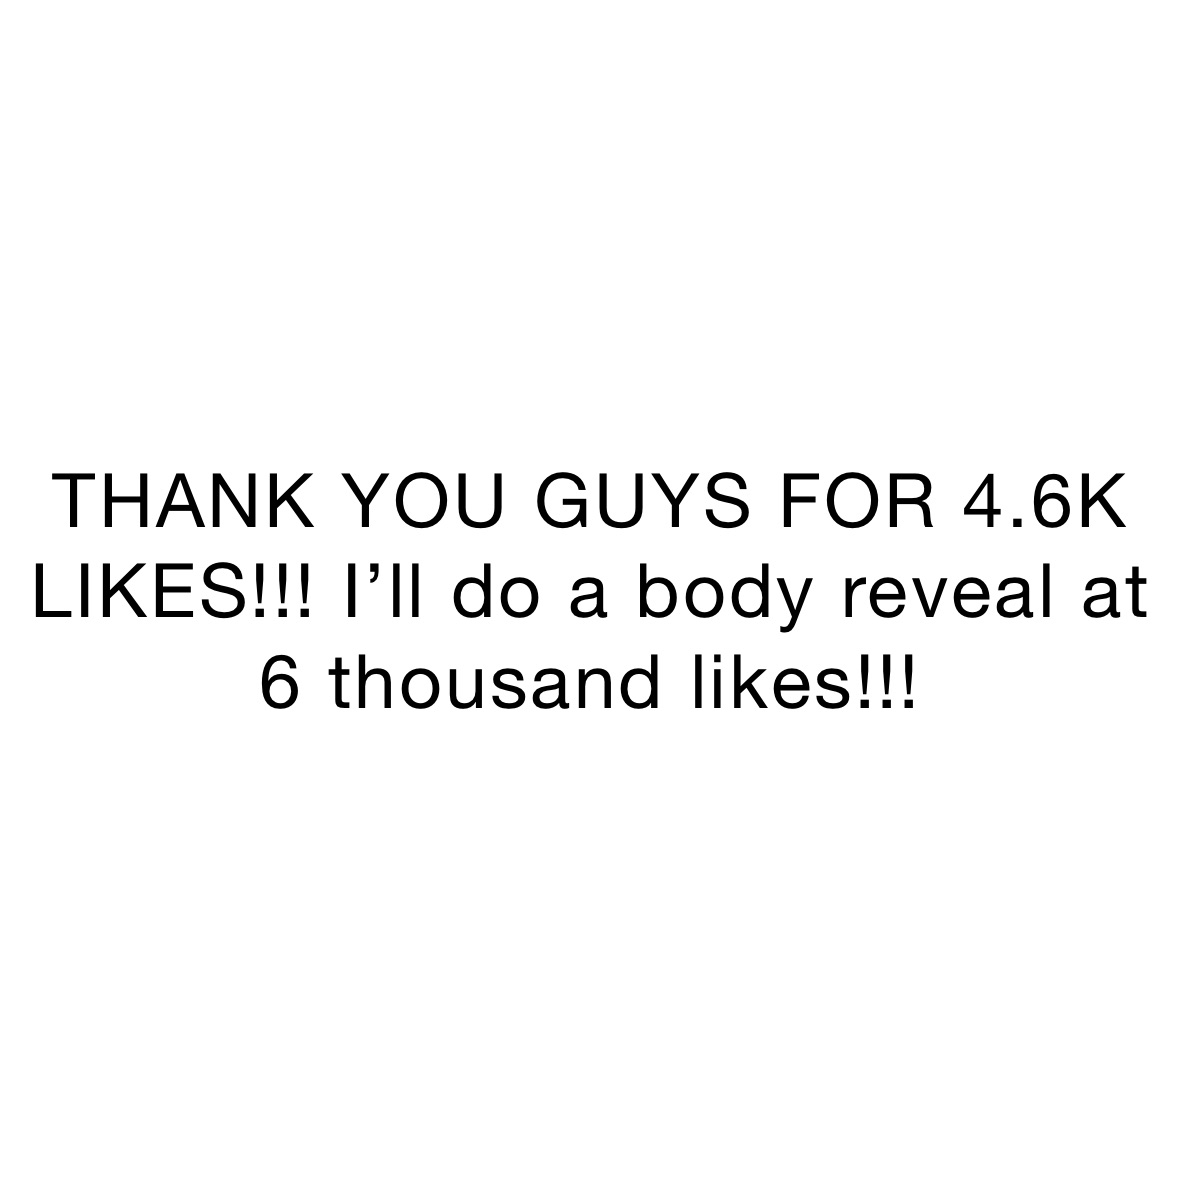 THANK YOU GUYS FOR 4.6K LIKES!!! I’ll do a body reveal at 6 thousand likes!!!